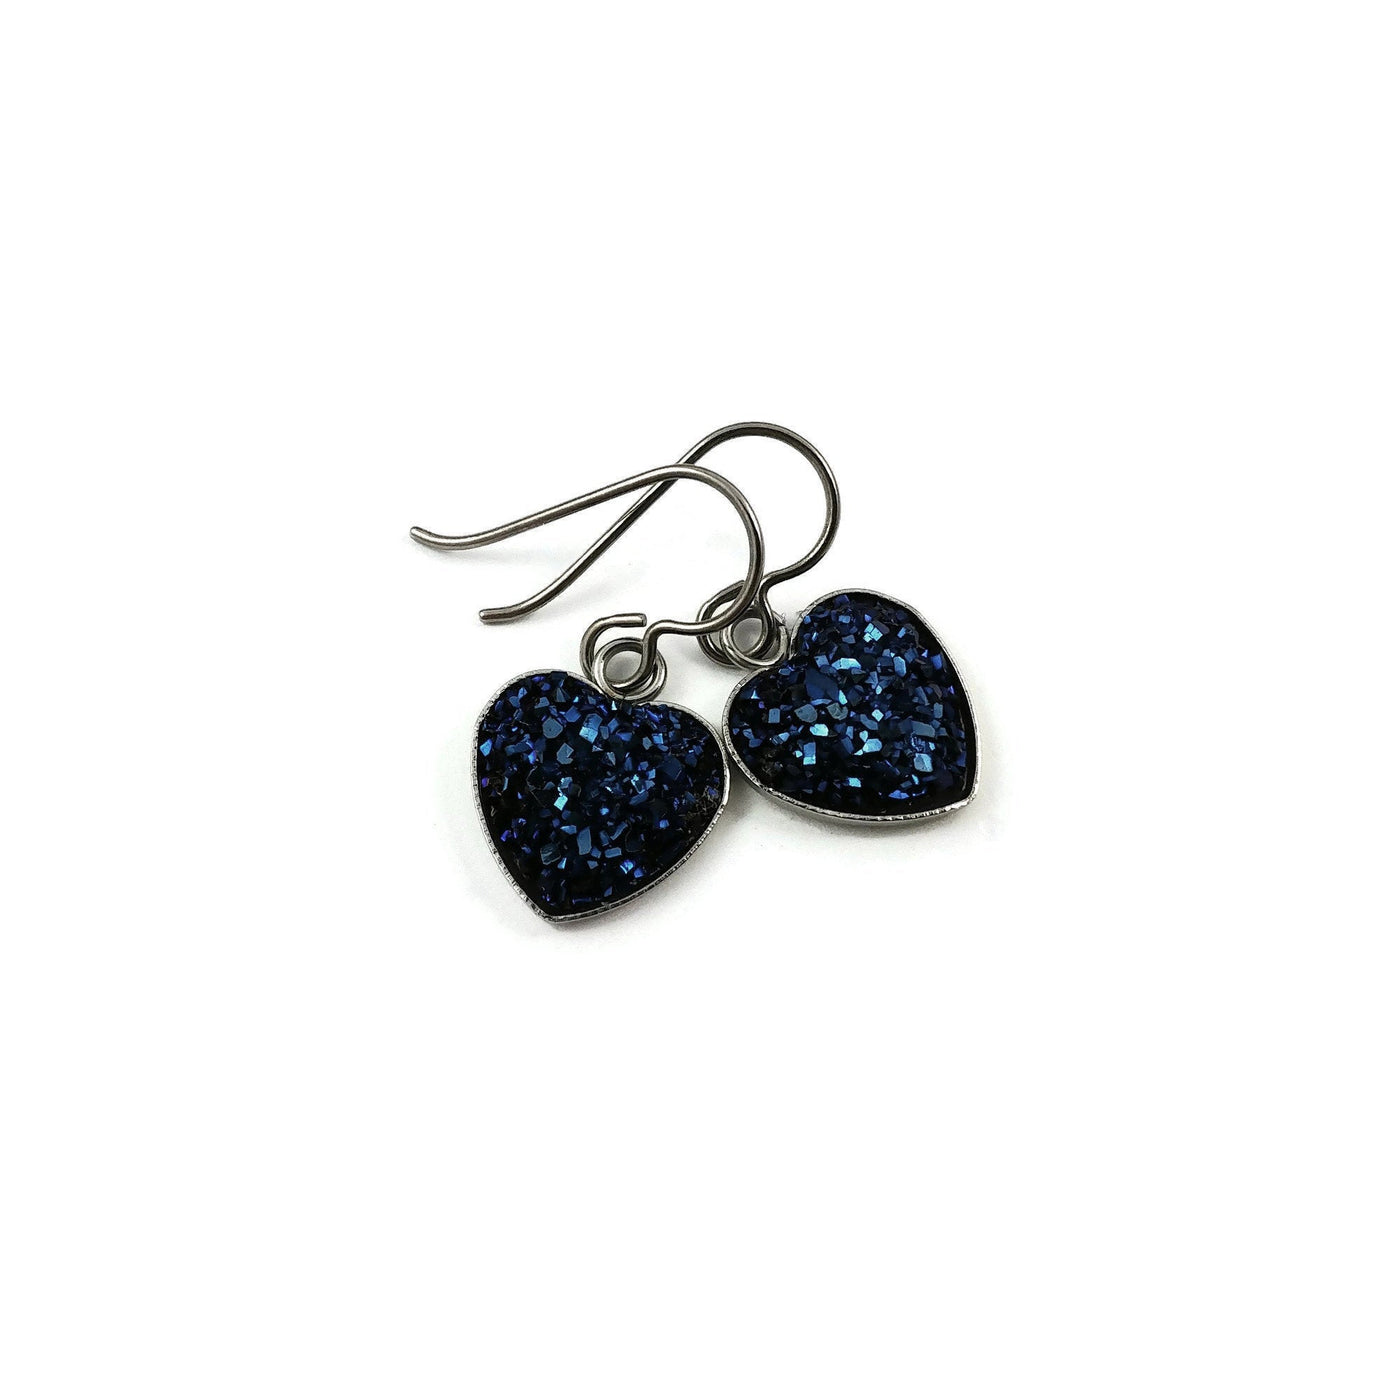 Midnight blue druzy heart dangle earrings - Hypoallergenic pure titanium, stainless steel and resin